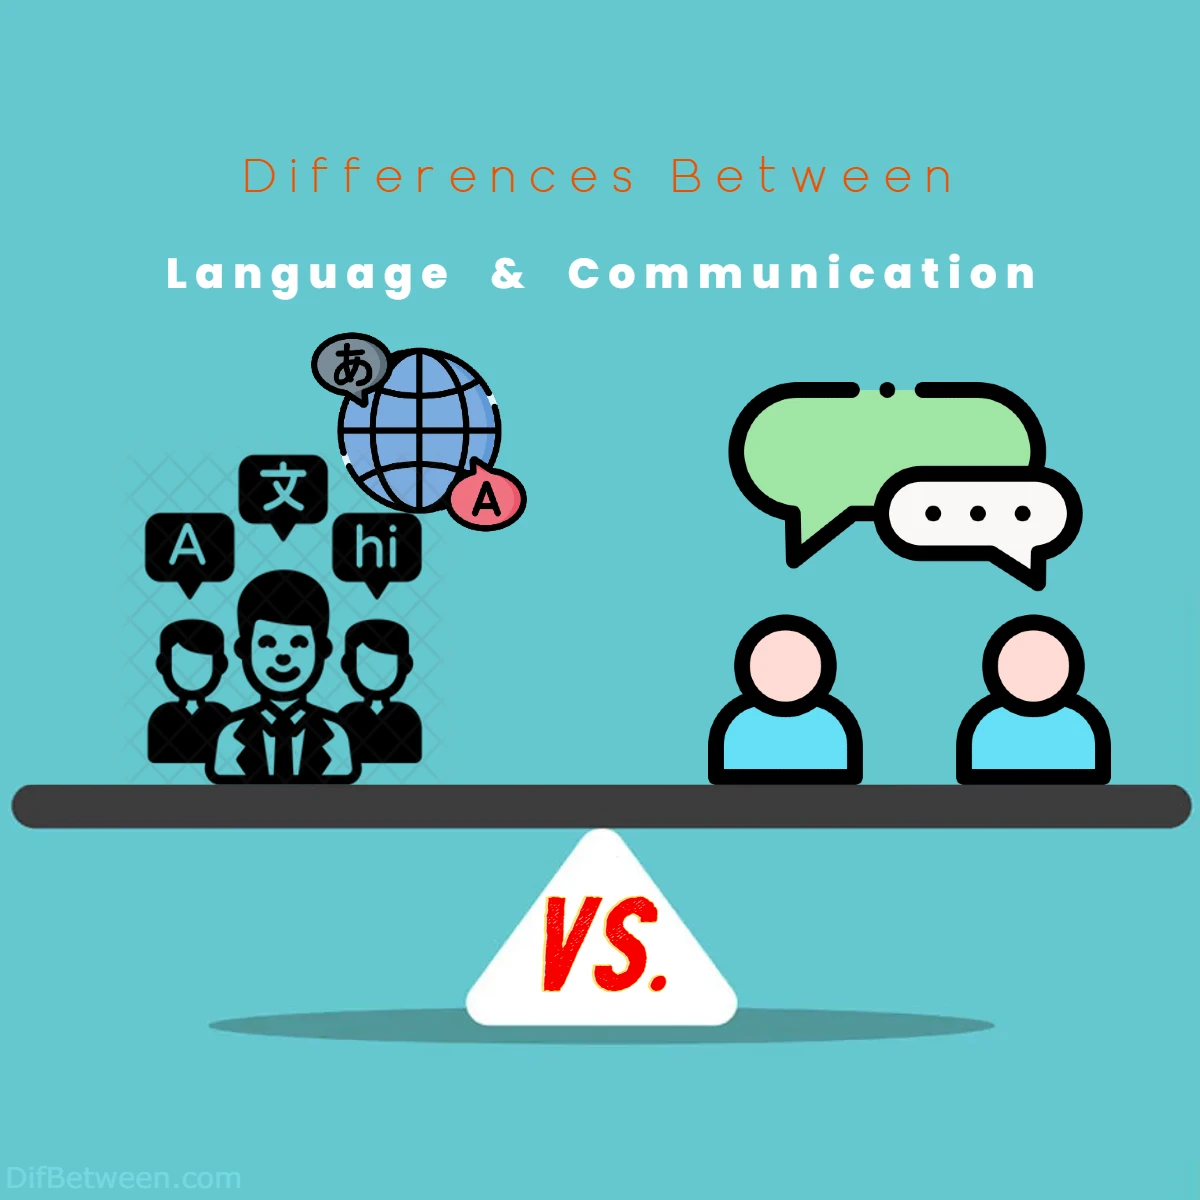 Differences Between Language vs Communication